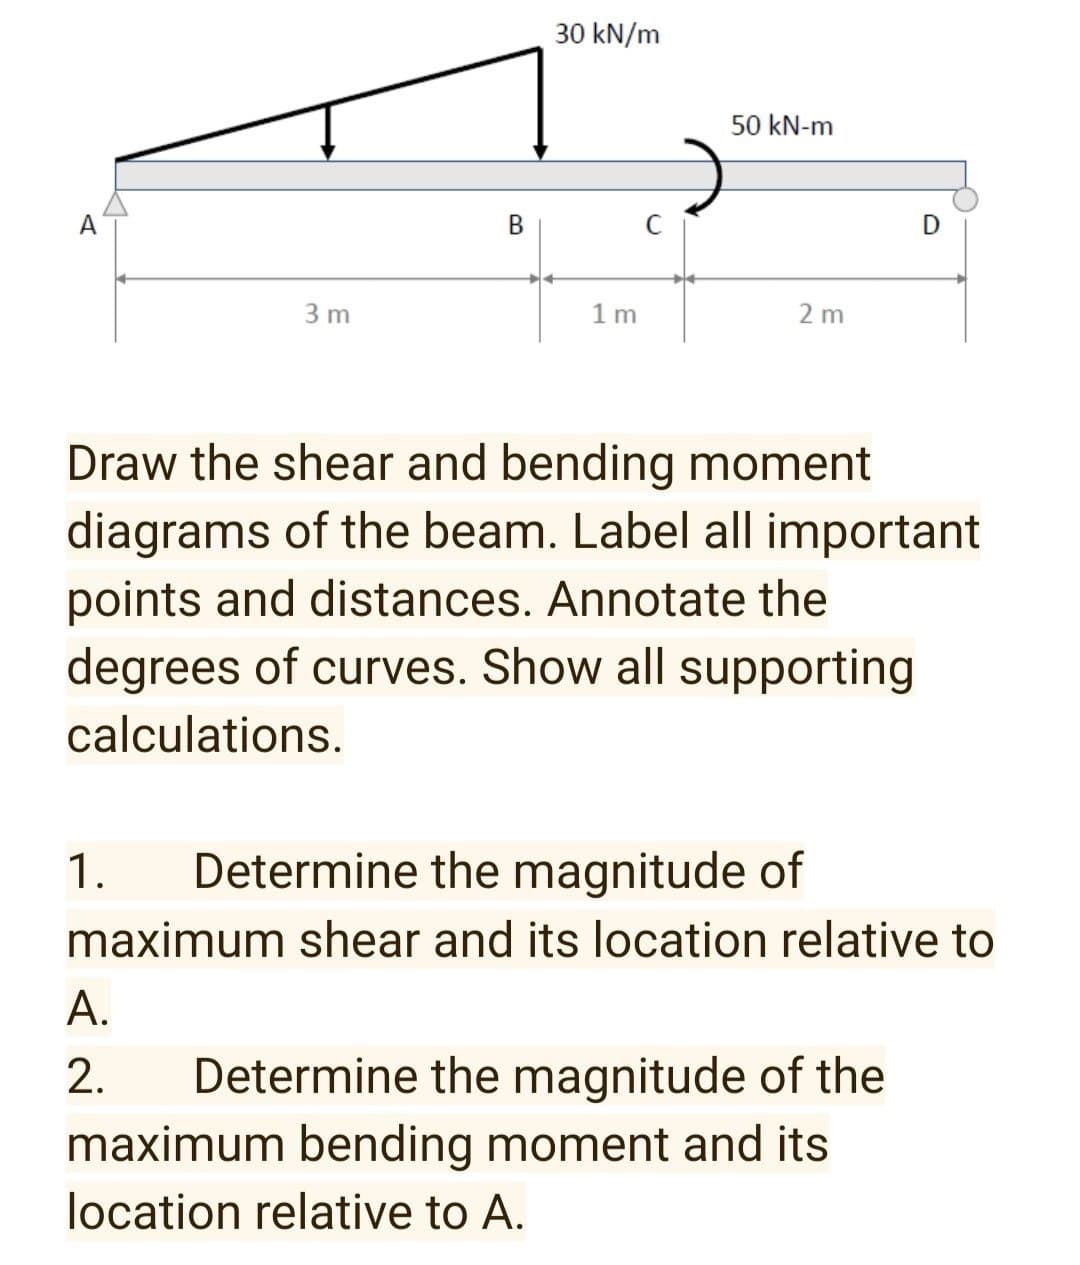 30 kN/m
50 kN-m
A
В
3 m
1 m
2 m
Draw the shear and bending moment
diagrams of the beam. Label all important
points and distances. Annotate the
degrees of curves. Show all supporting
calculations.
1.
Determine the magnitude of
maximum shear and its location relative to
А.
Determine the magnitude of the
maximum bending moment and its
2.
location relative to A.
